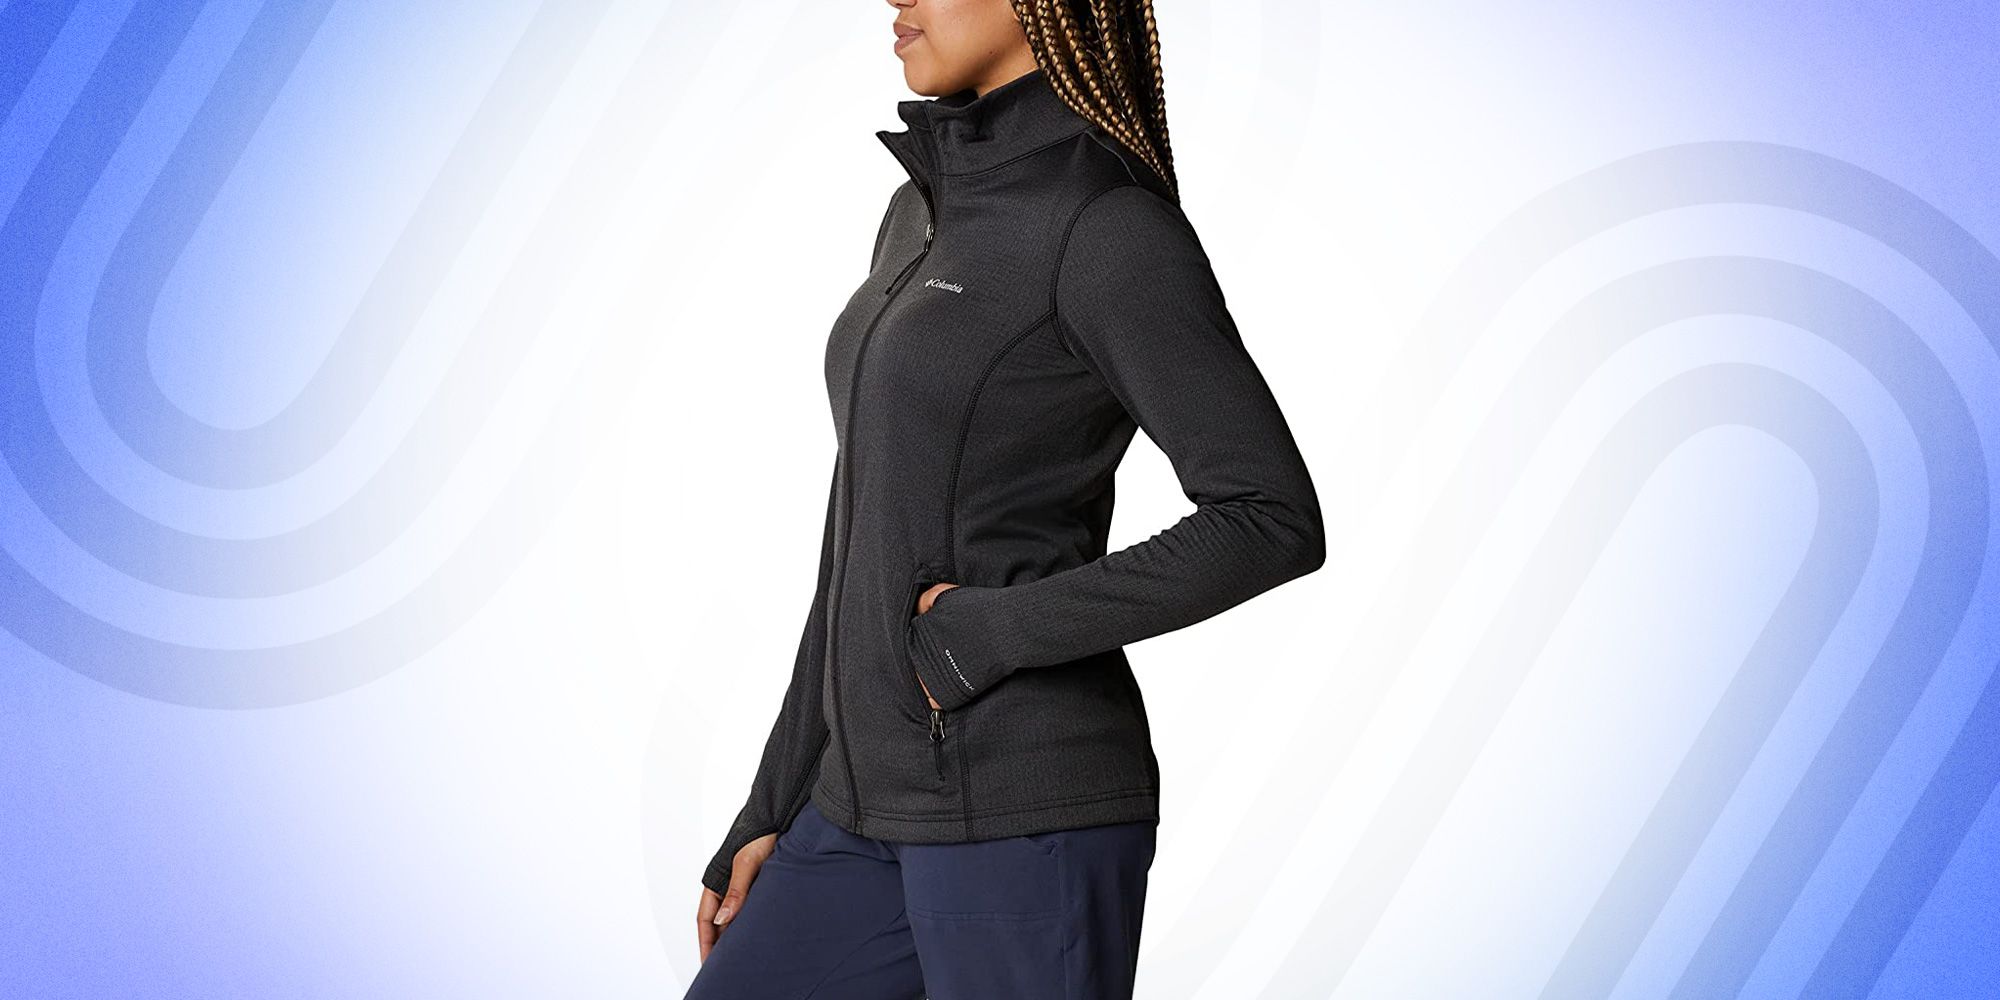 BALEAF Womens Fleece Full Zip Athletic Running Jackets Hooded Thermal Sport with Thumb Holes 